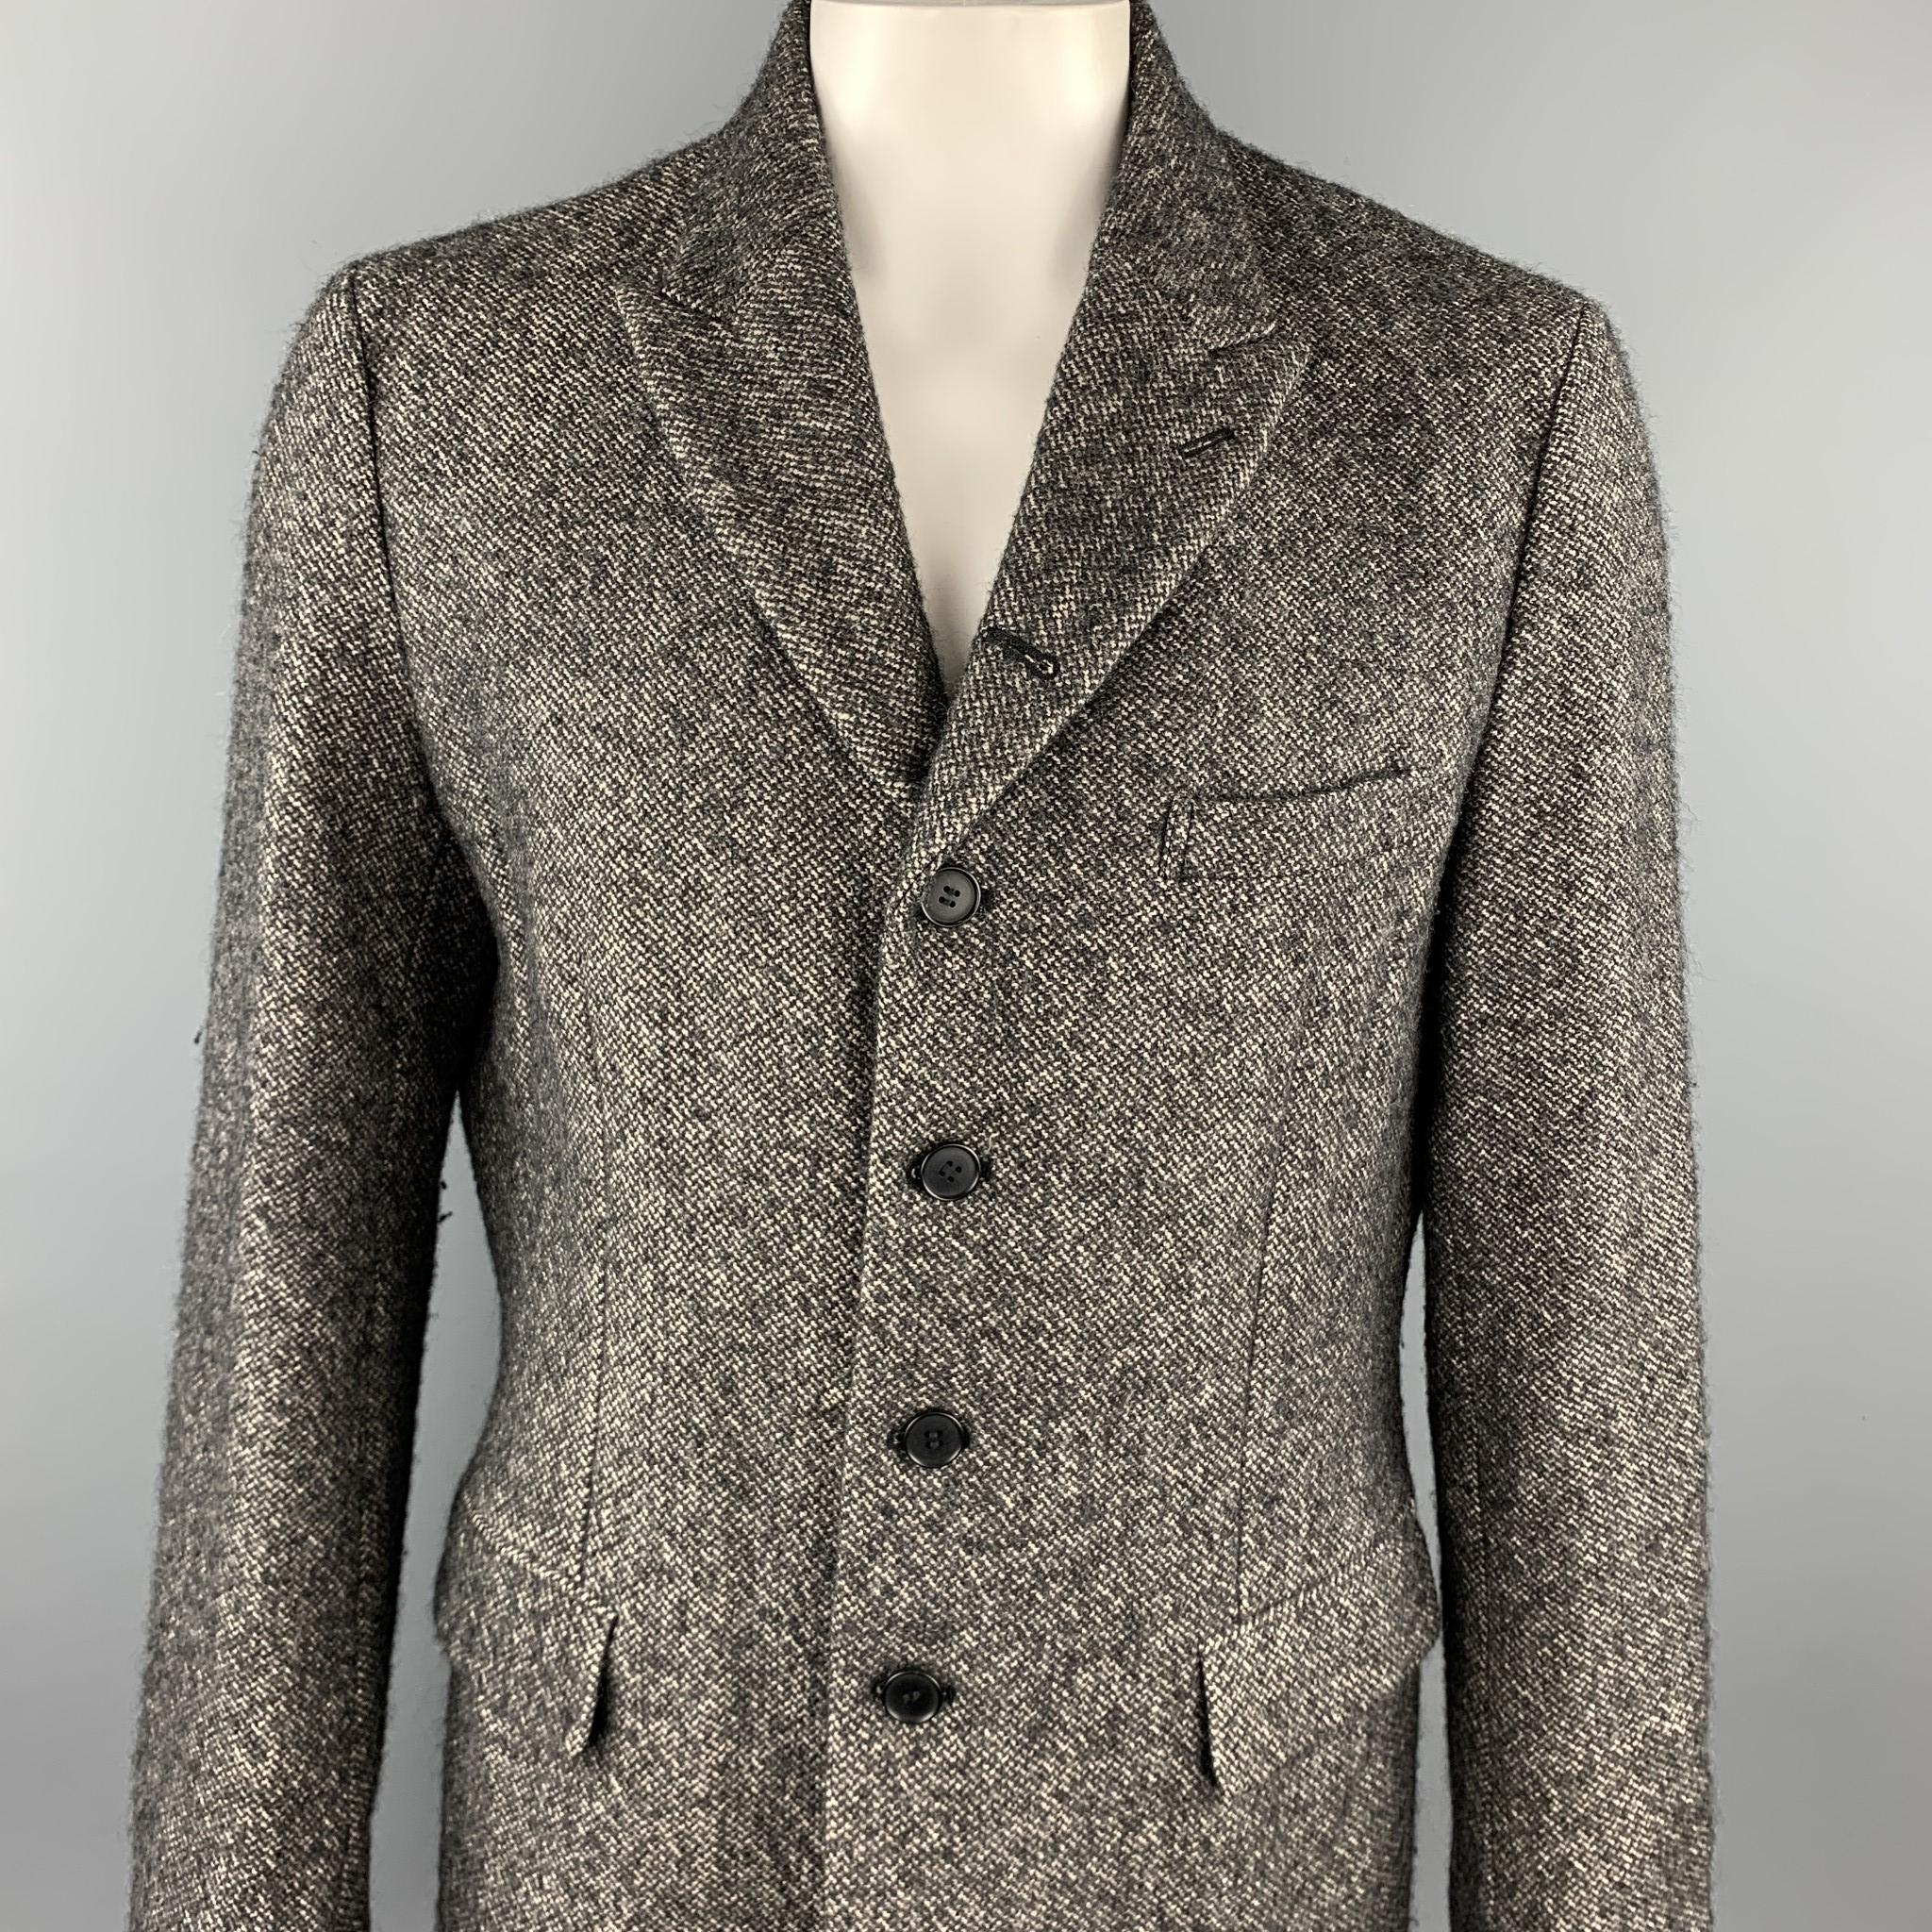 COMME des GARCONS HOMME PLUS coat comes in a taupe & black tweed linen / wool featuring a peak lapel, flap pockets, and a buttoned closure. Minor wear. As-Is. Made in Japan.

Very Good Pre-Owned Condition.
Marked: XL

Measurements:

Shoulder: 19 in.